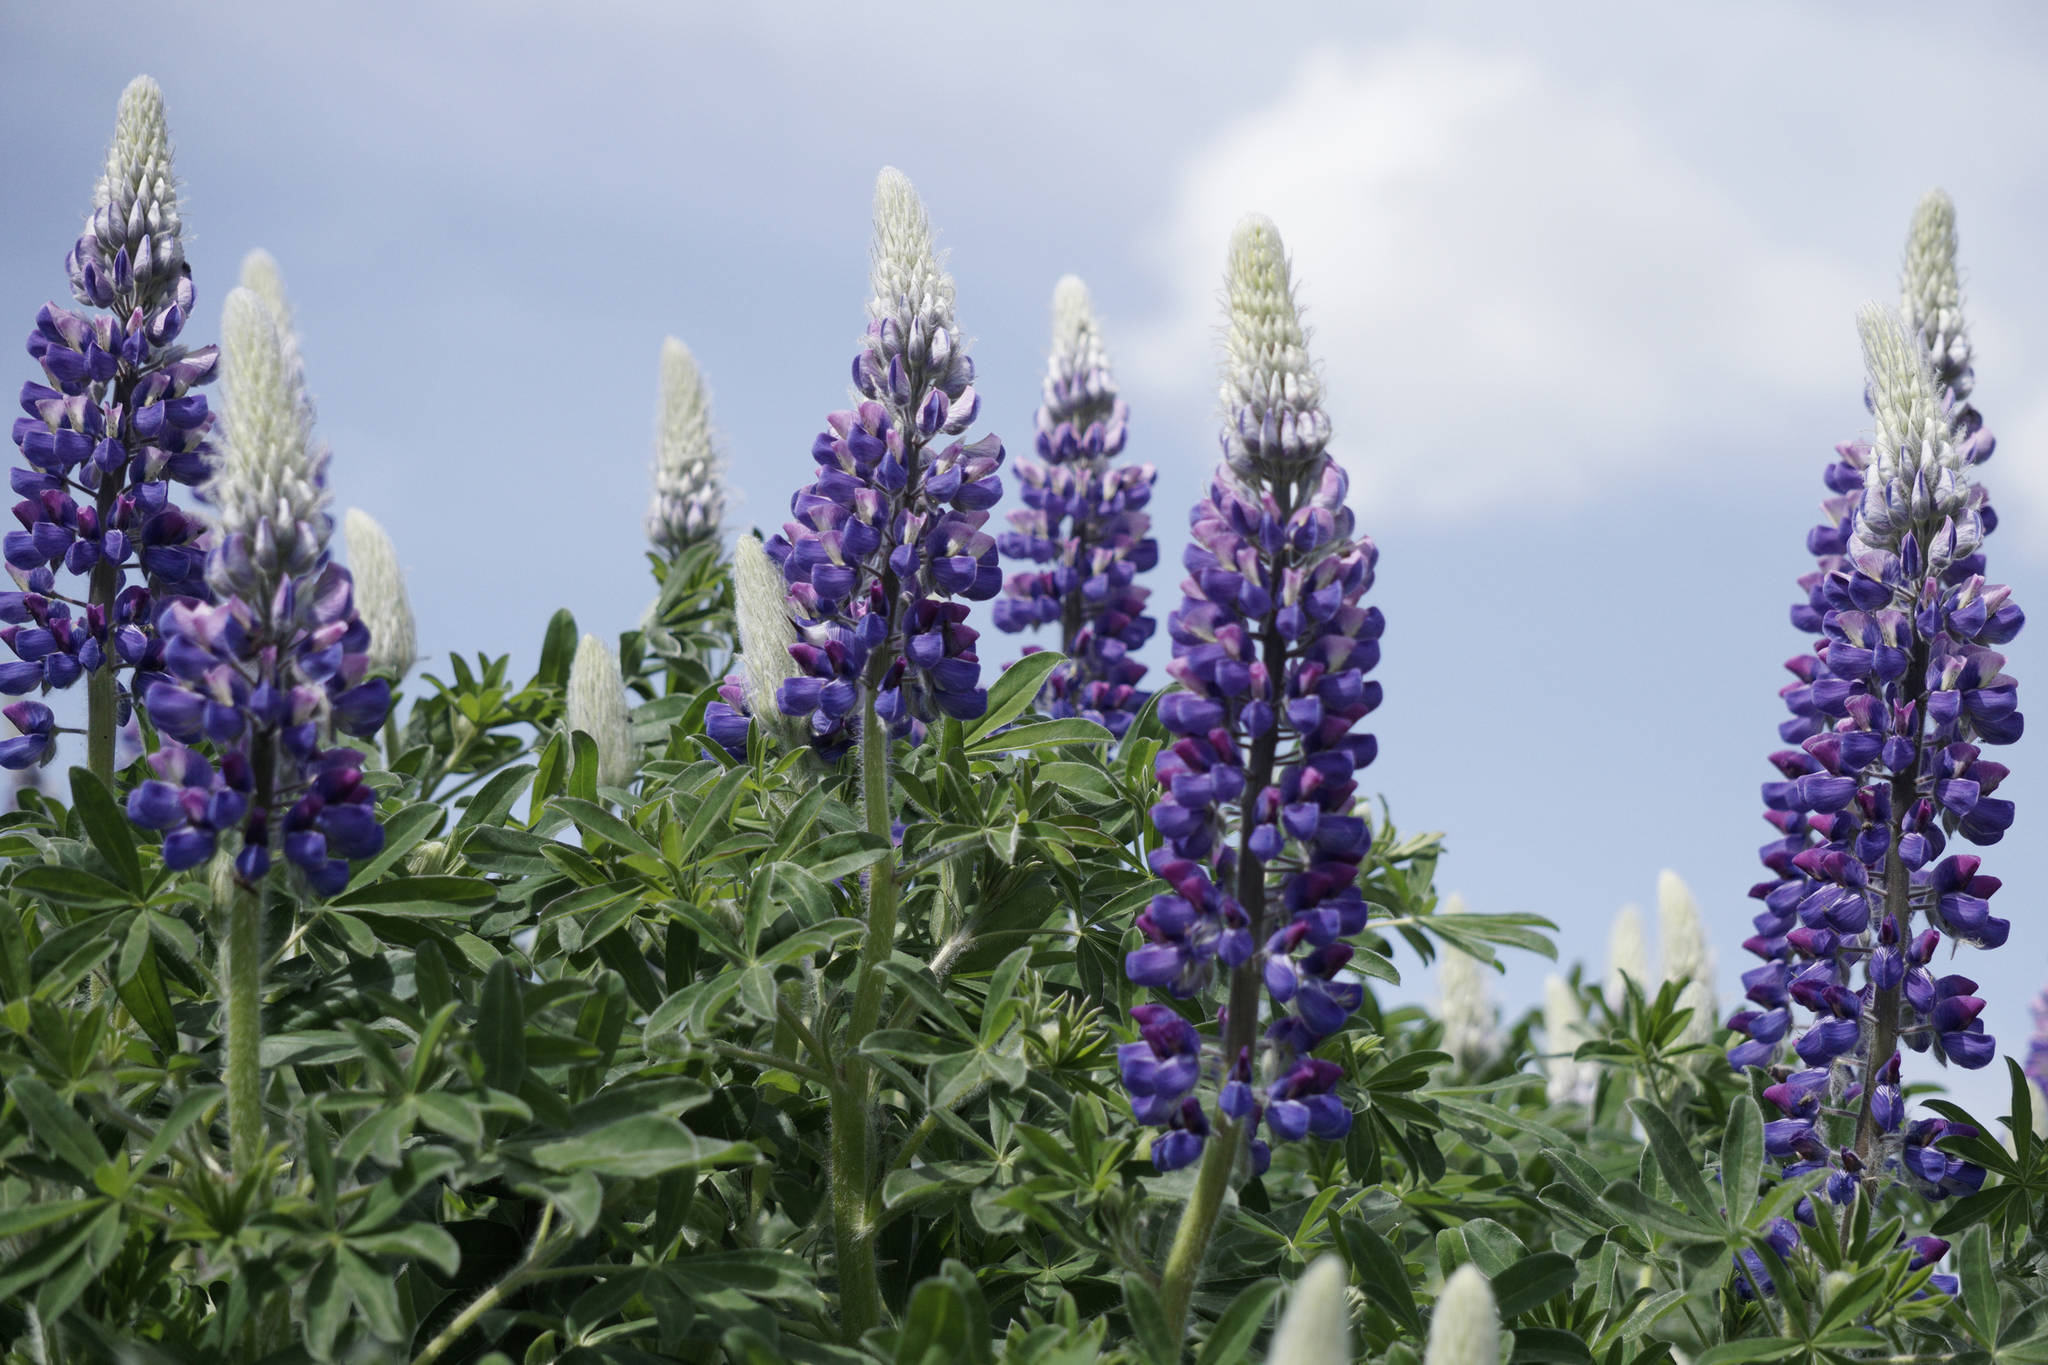 Lupines bloom along the Homer Spit trail on June 6, 2019, in Homer, Alaska. (Photo by Michael Armstrong/Homer News)